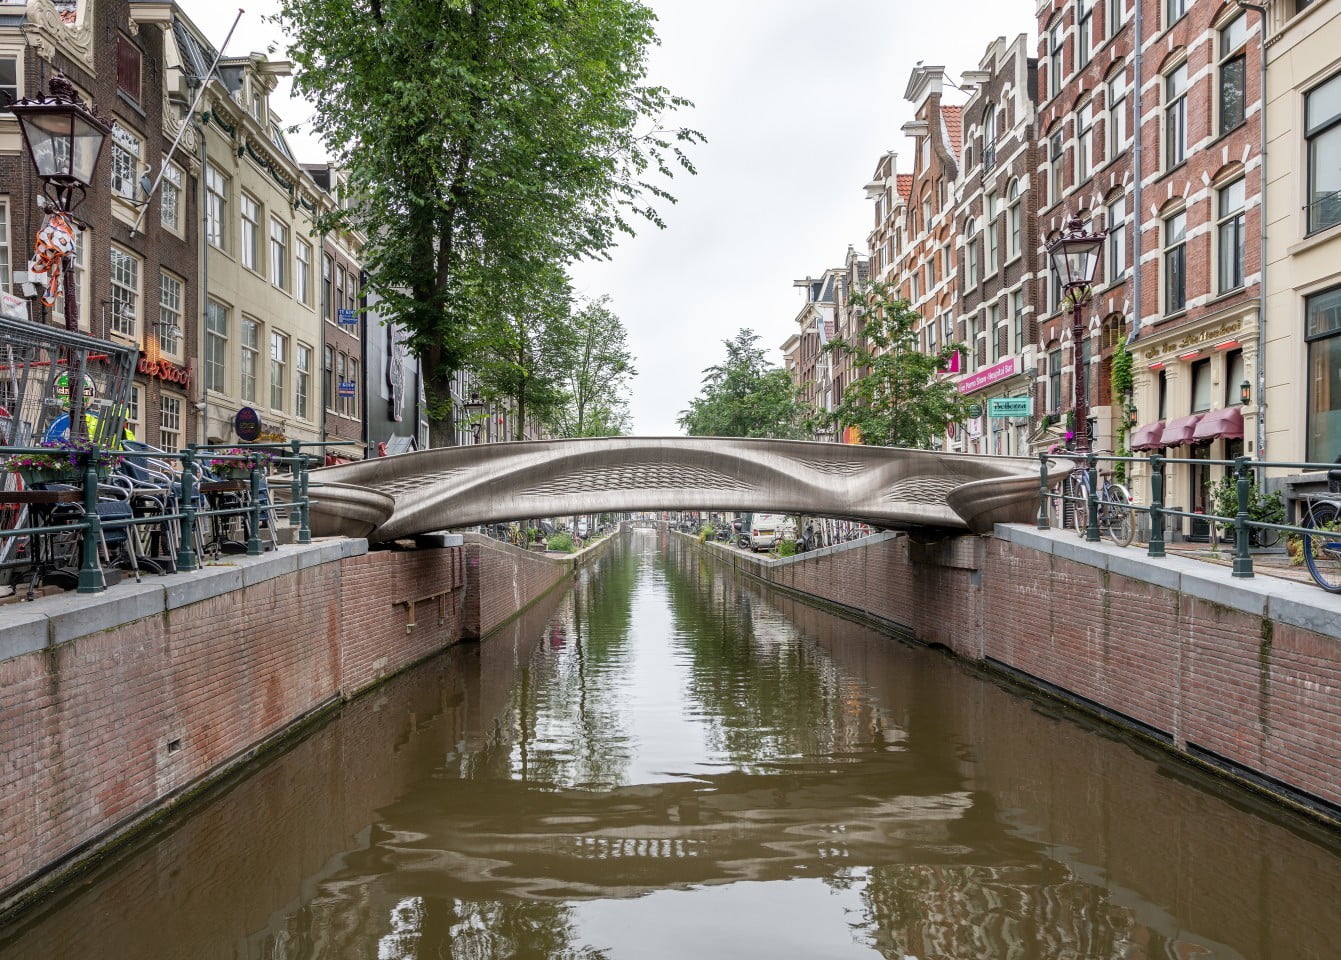 The world's first 3D printed bridge is a new attraction in the Netherlands.